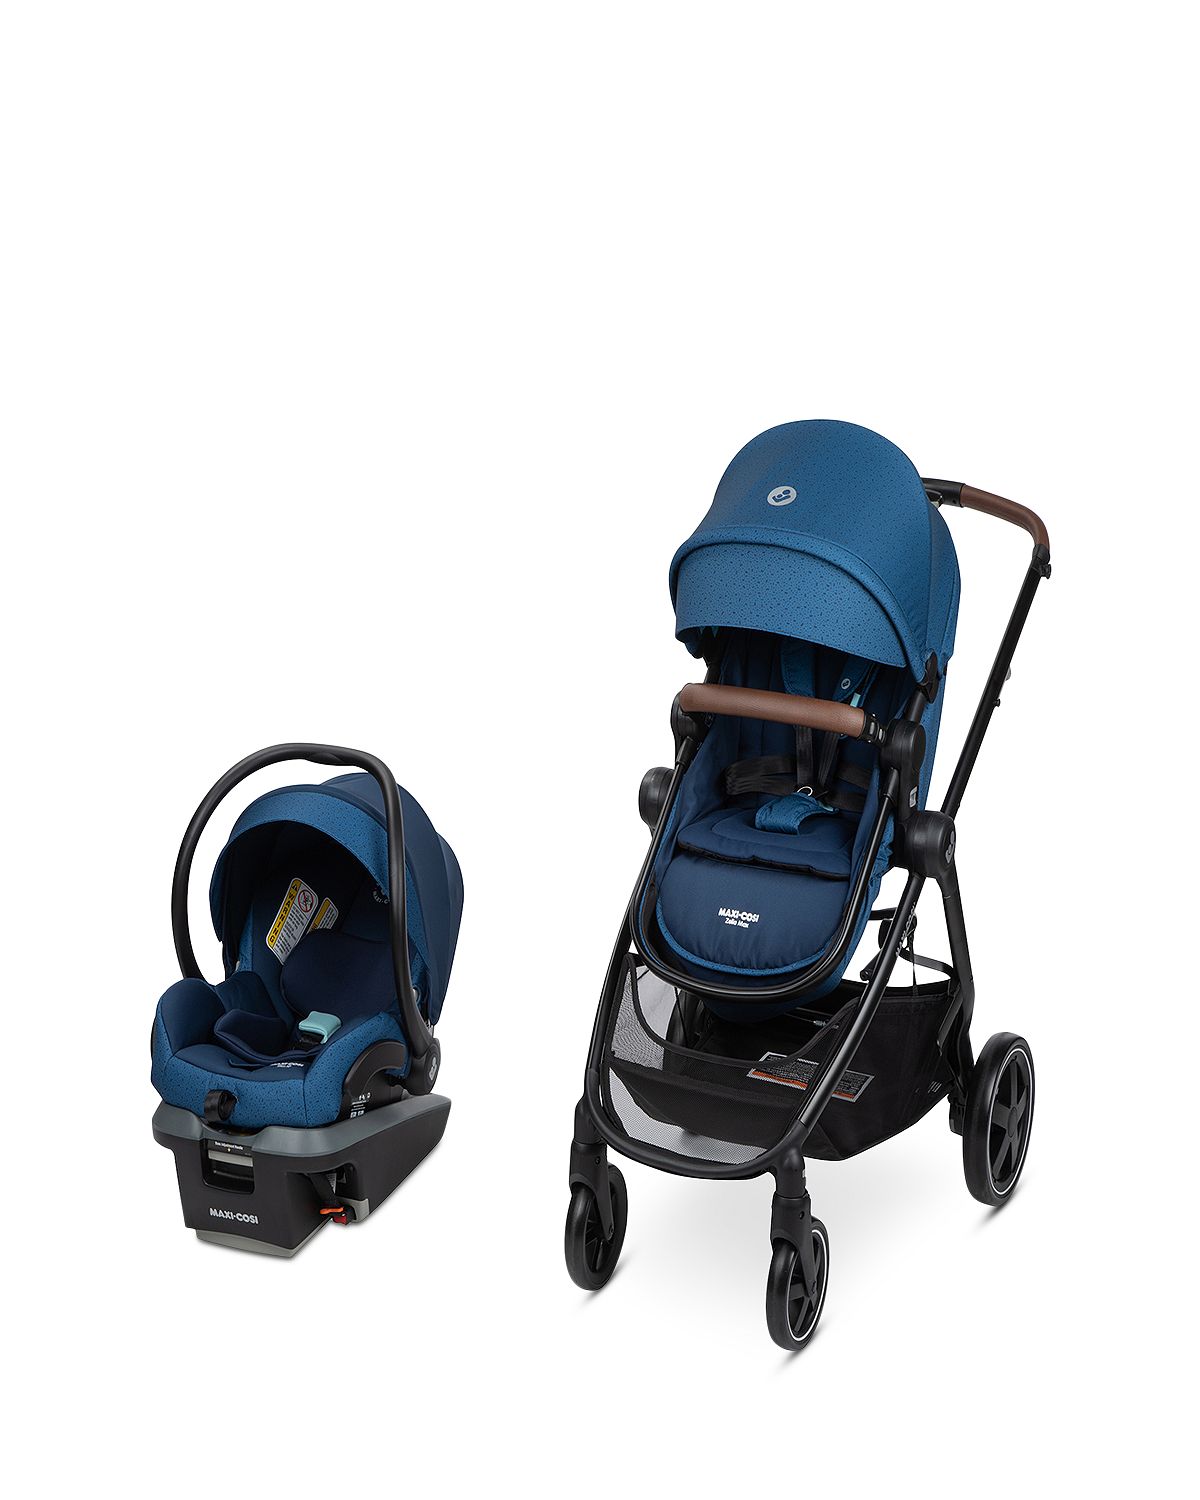 Photo 1 of Zelia² Max Travel System with Mico Max 30